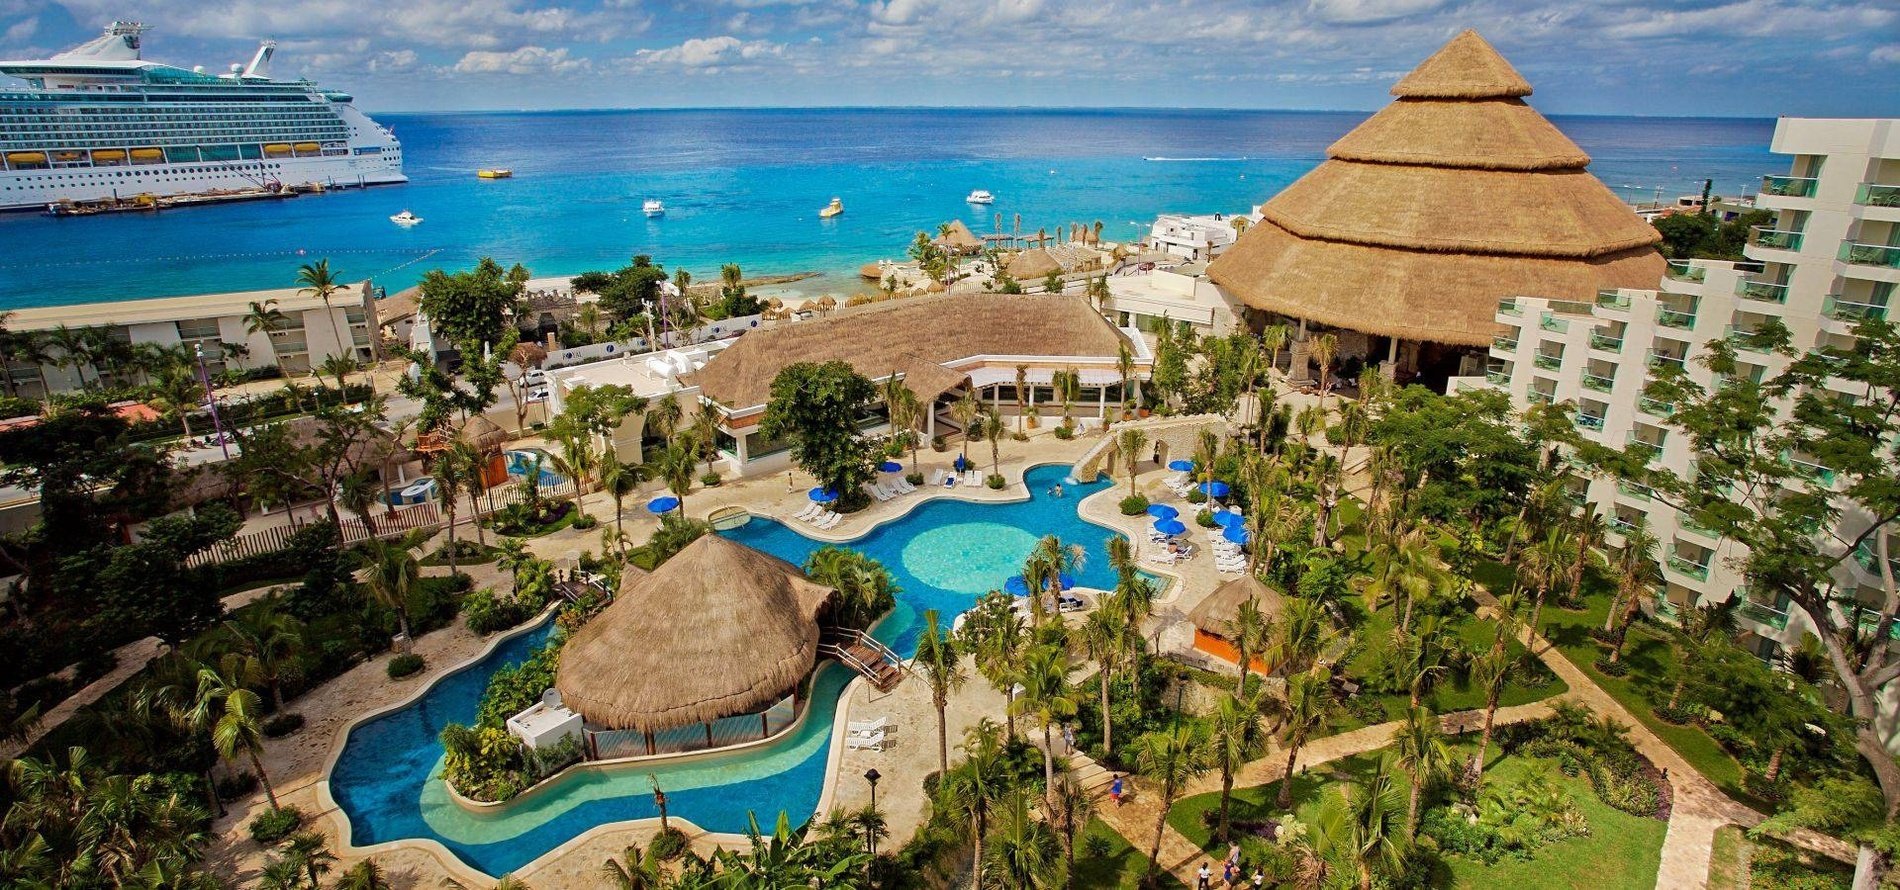 Overview of the Grand Park Royal Cozumel Hotel facilities in the Mexican Caribbean